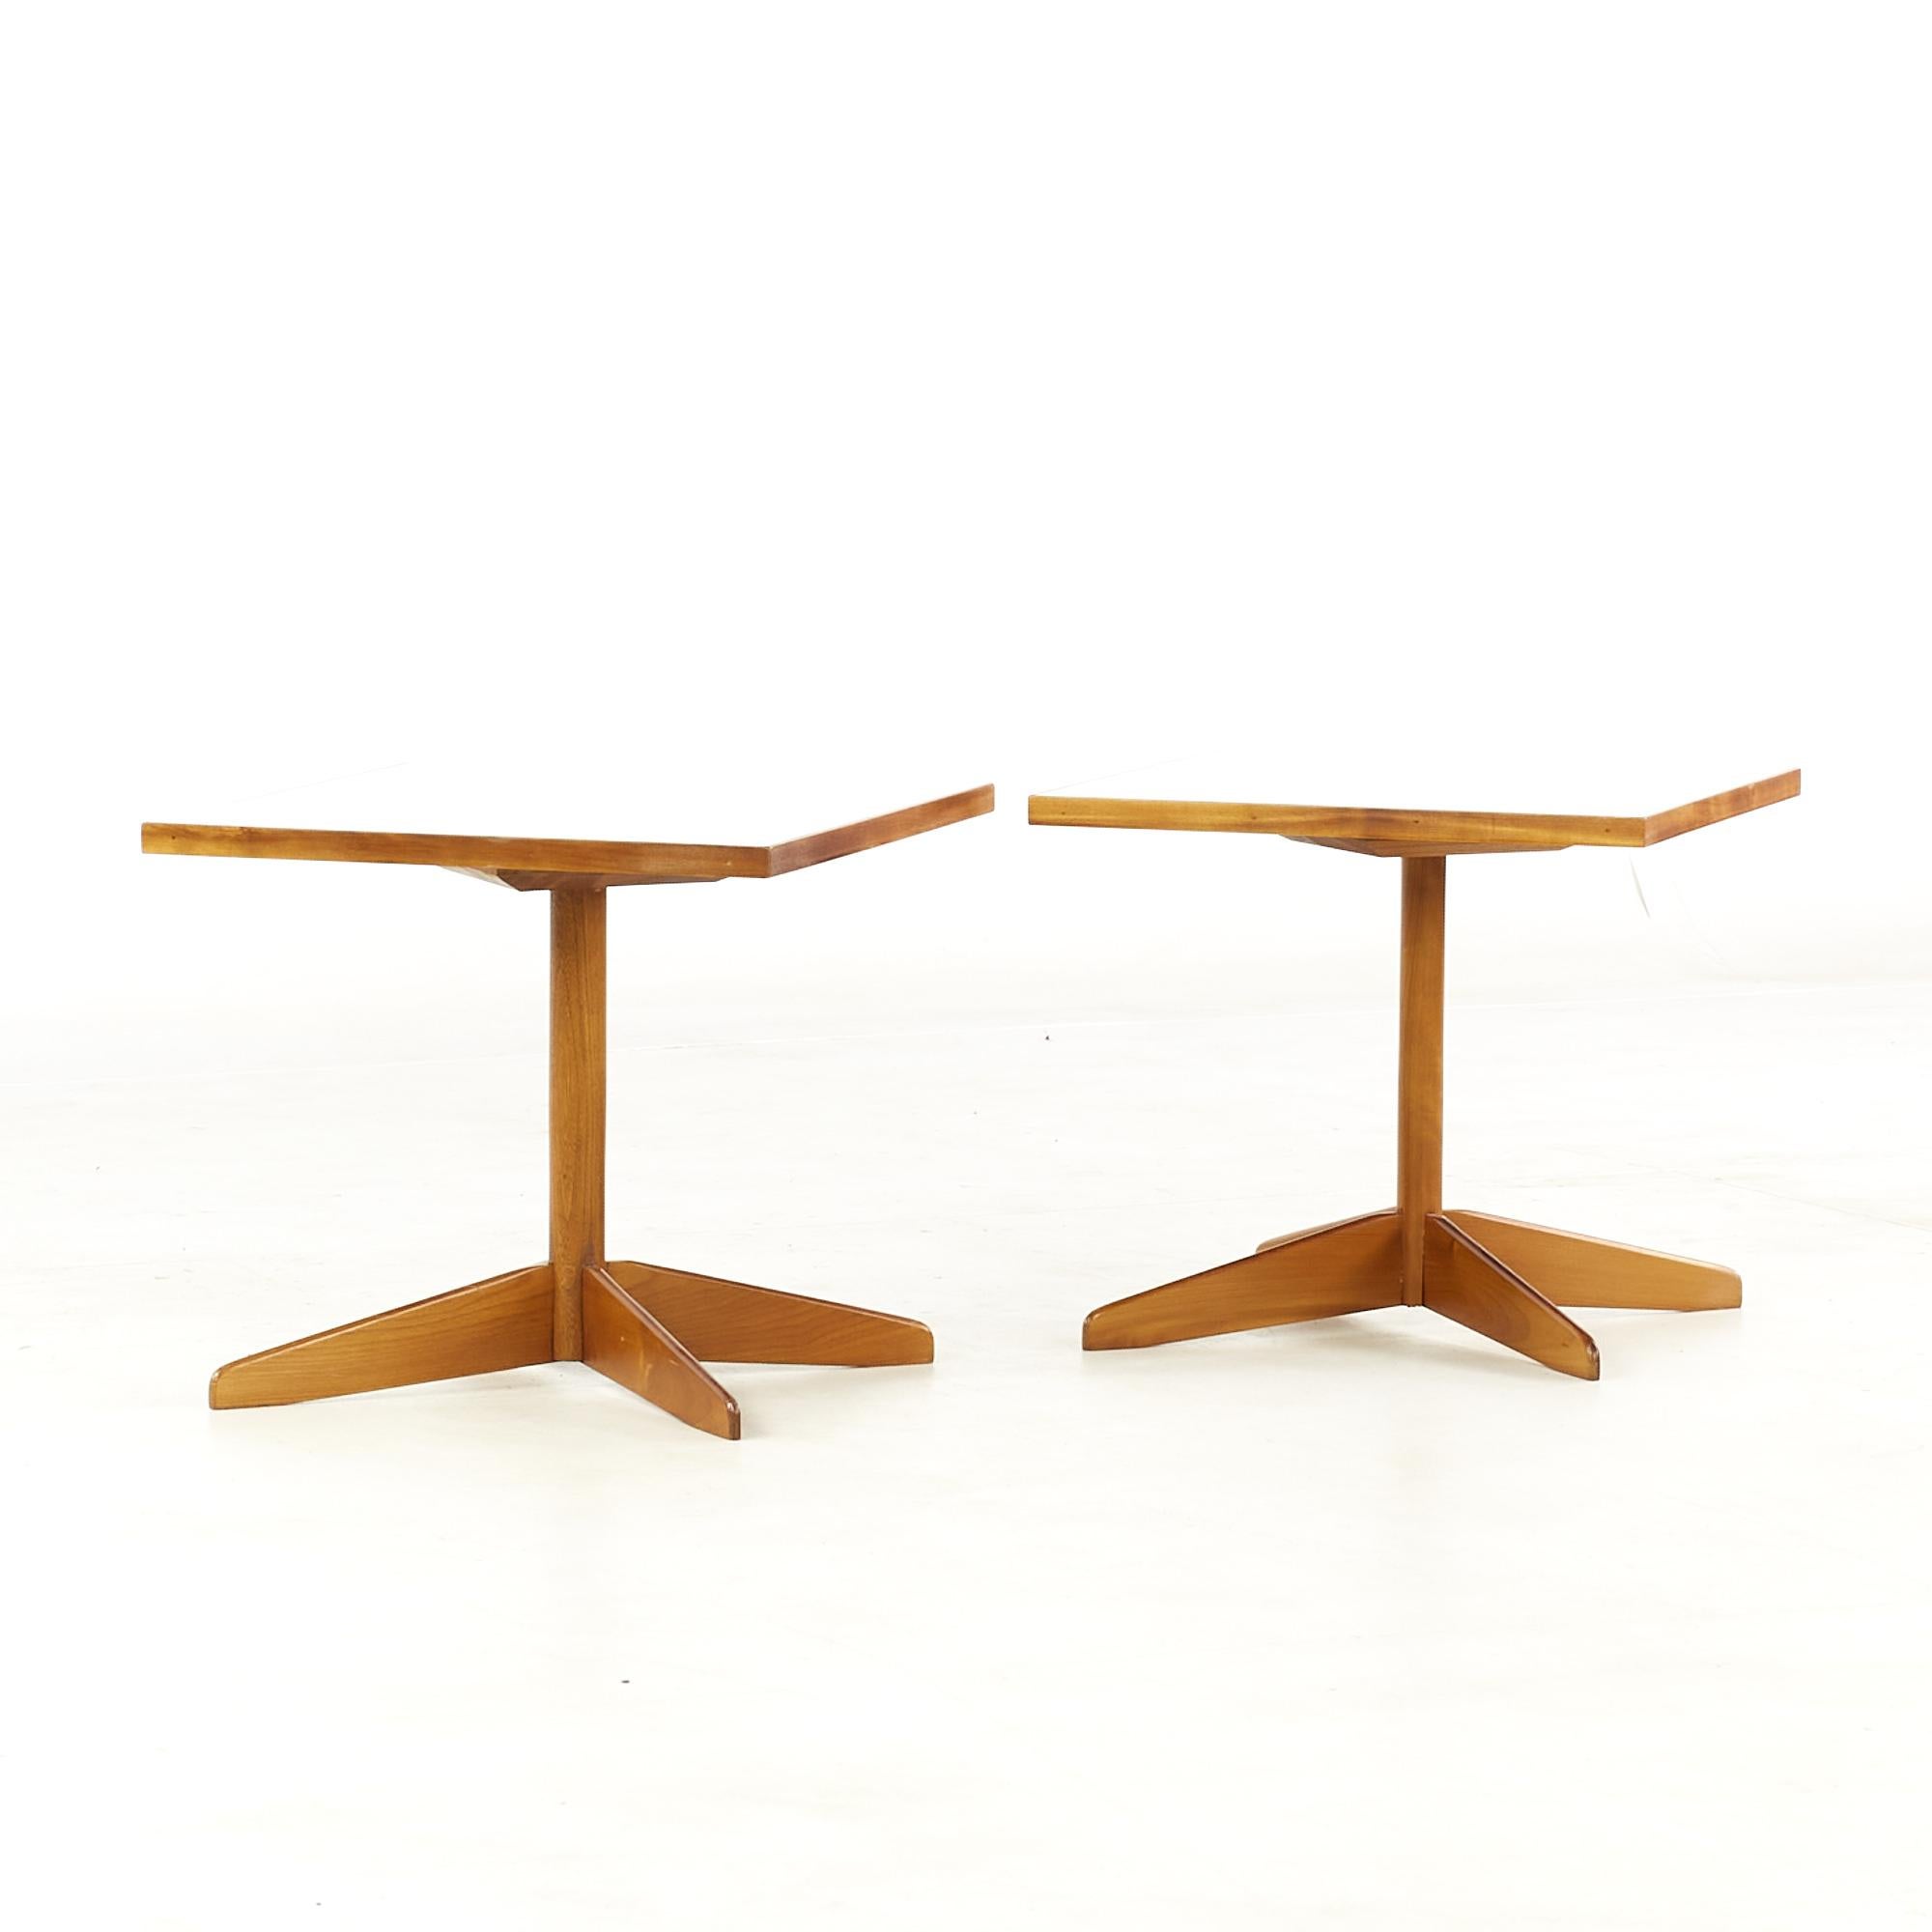 Edward Wormley style mid-century walnut and white laminate end tables - pair.

Each table measures: 18 wide x 18 deep x 16 inches high.

All pieces of furniture can be had in what we call restored vintage condition. That means the piece is